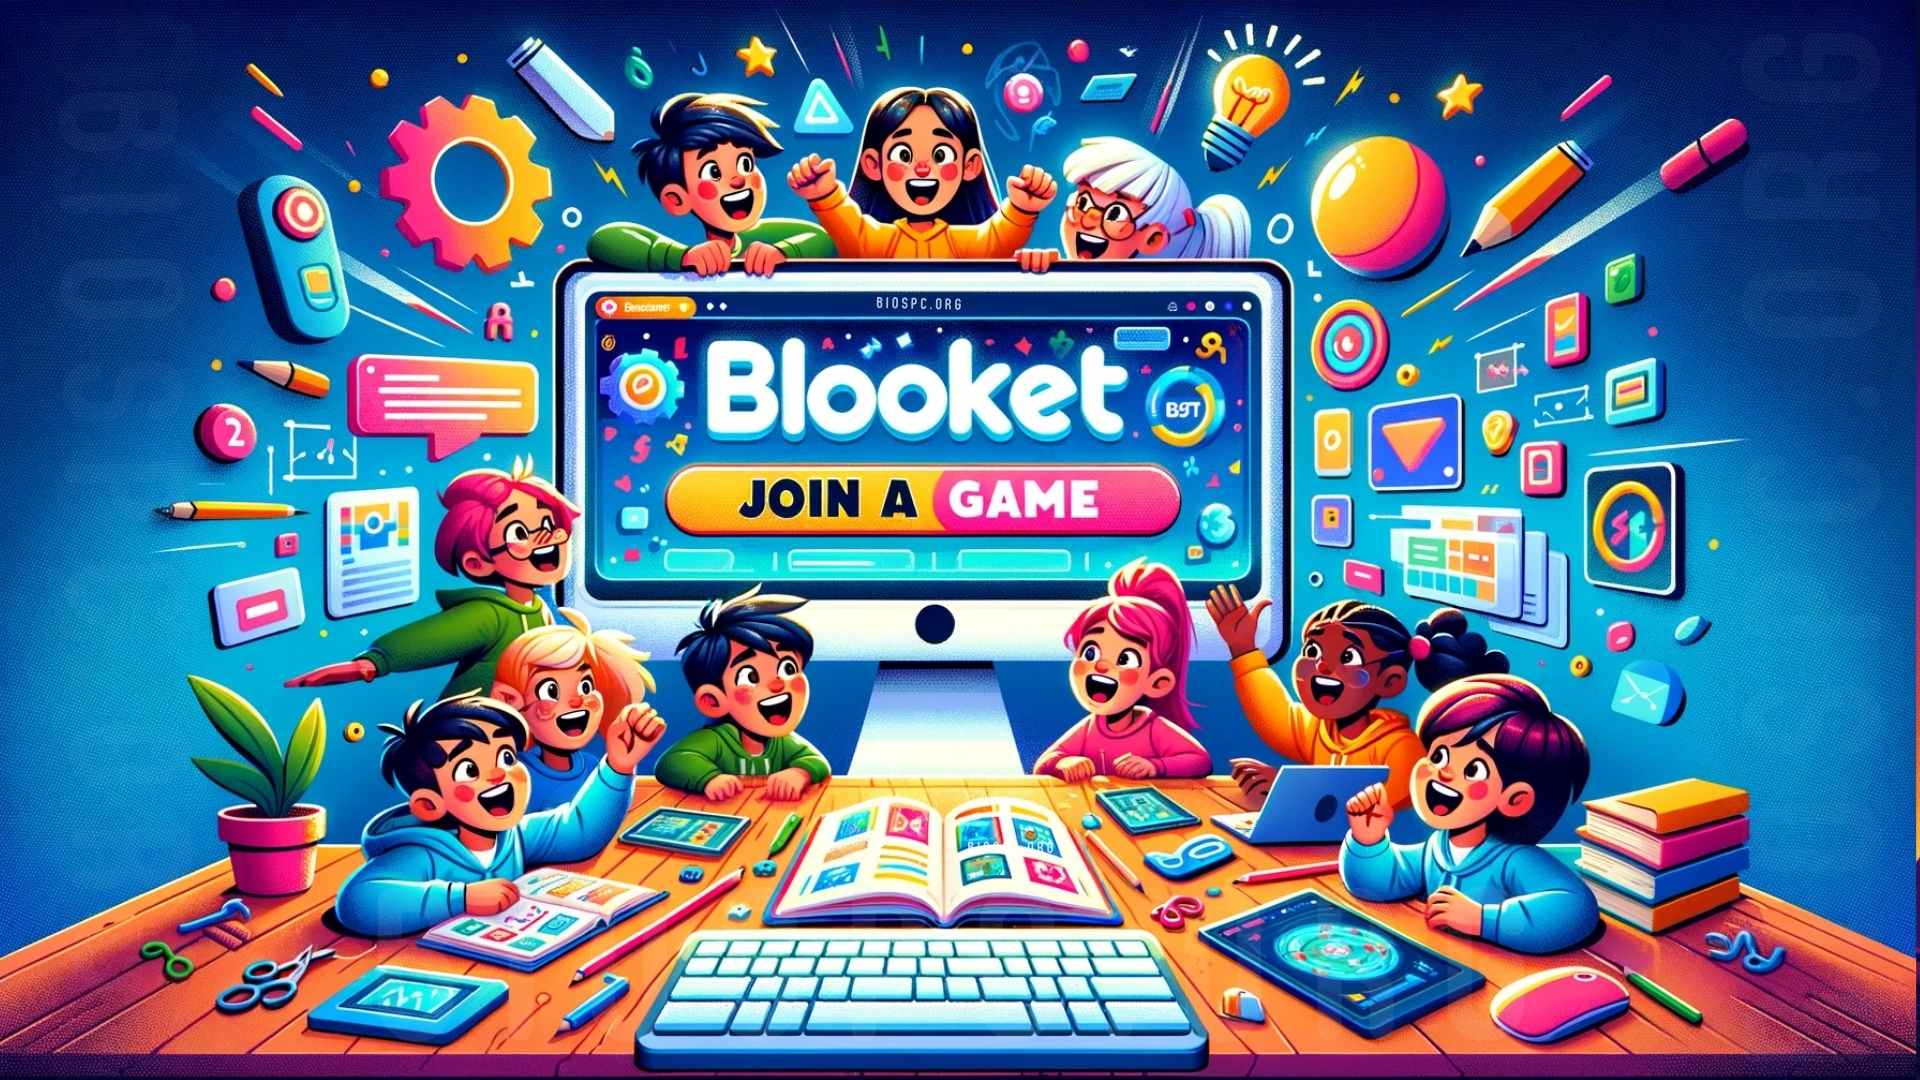 Blooket: Overview, Pricing, And Features